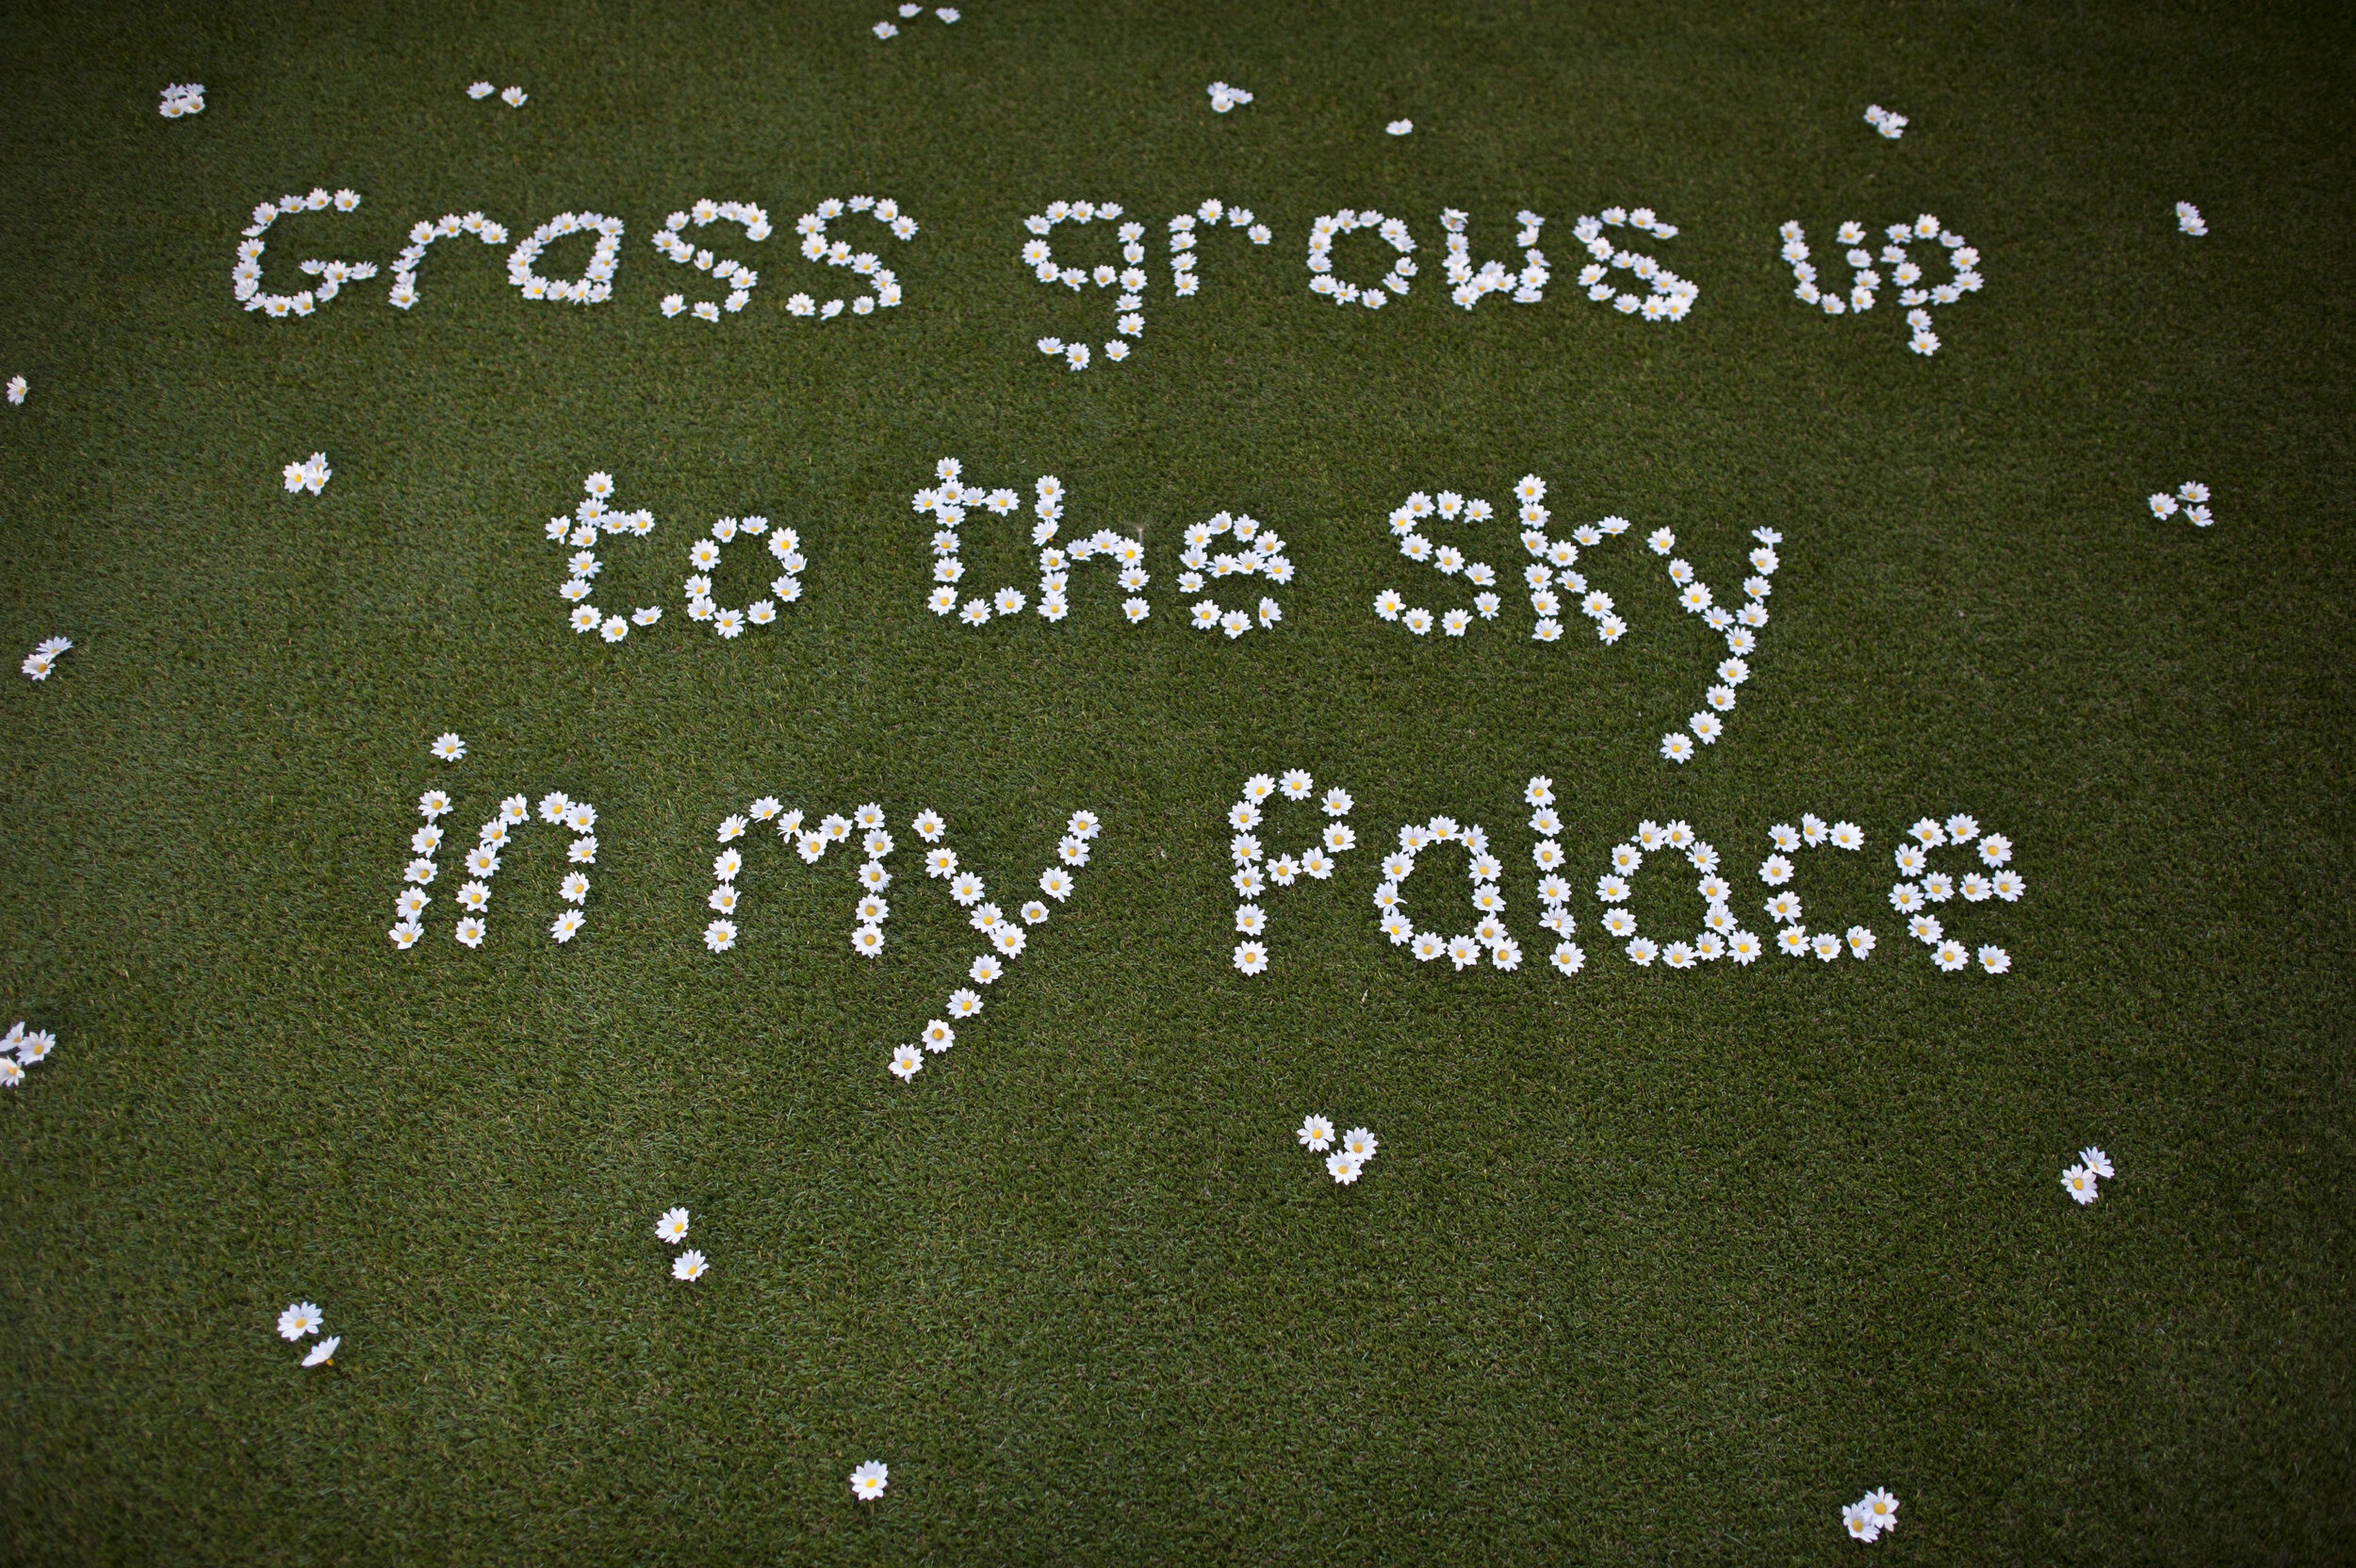  grass grows up to the sky in my palace is written on grass in daisies.    